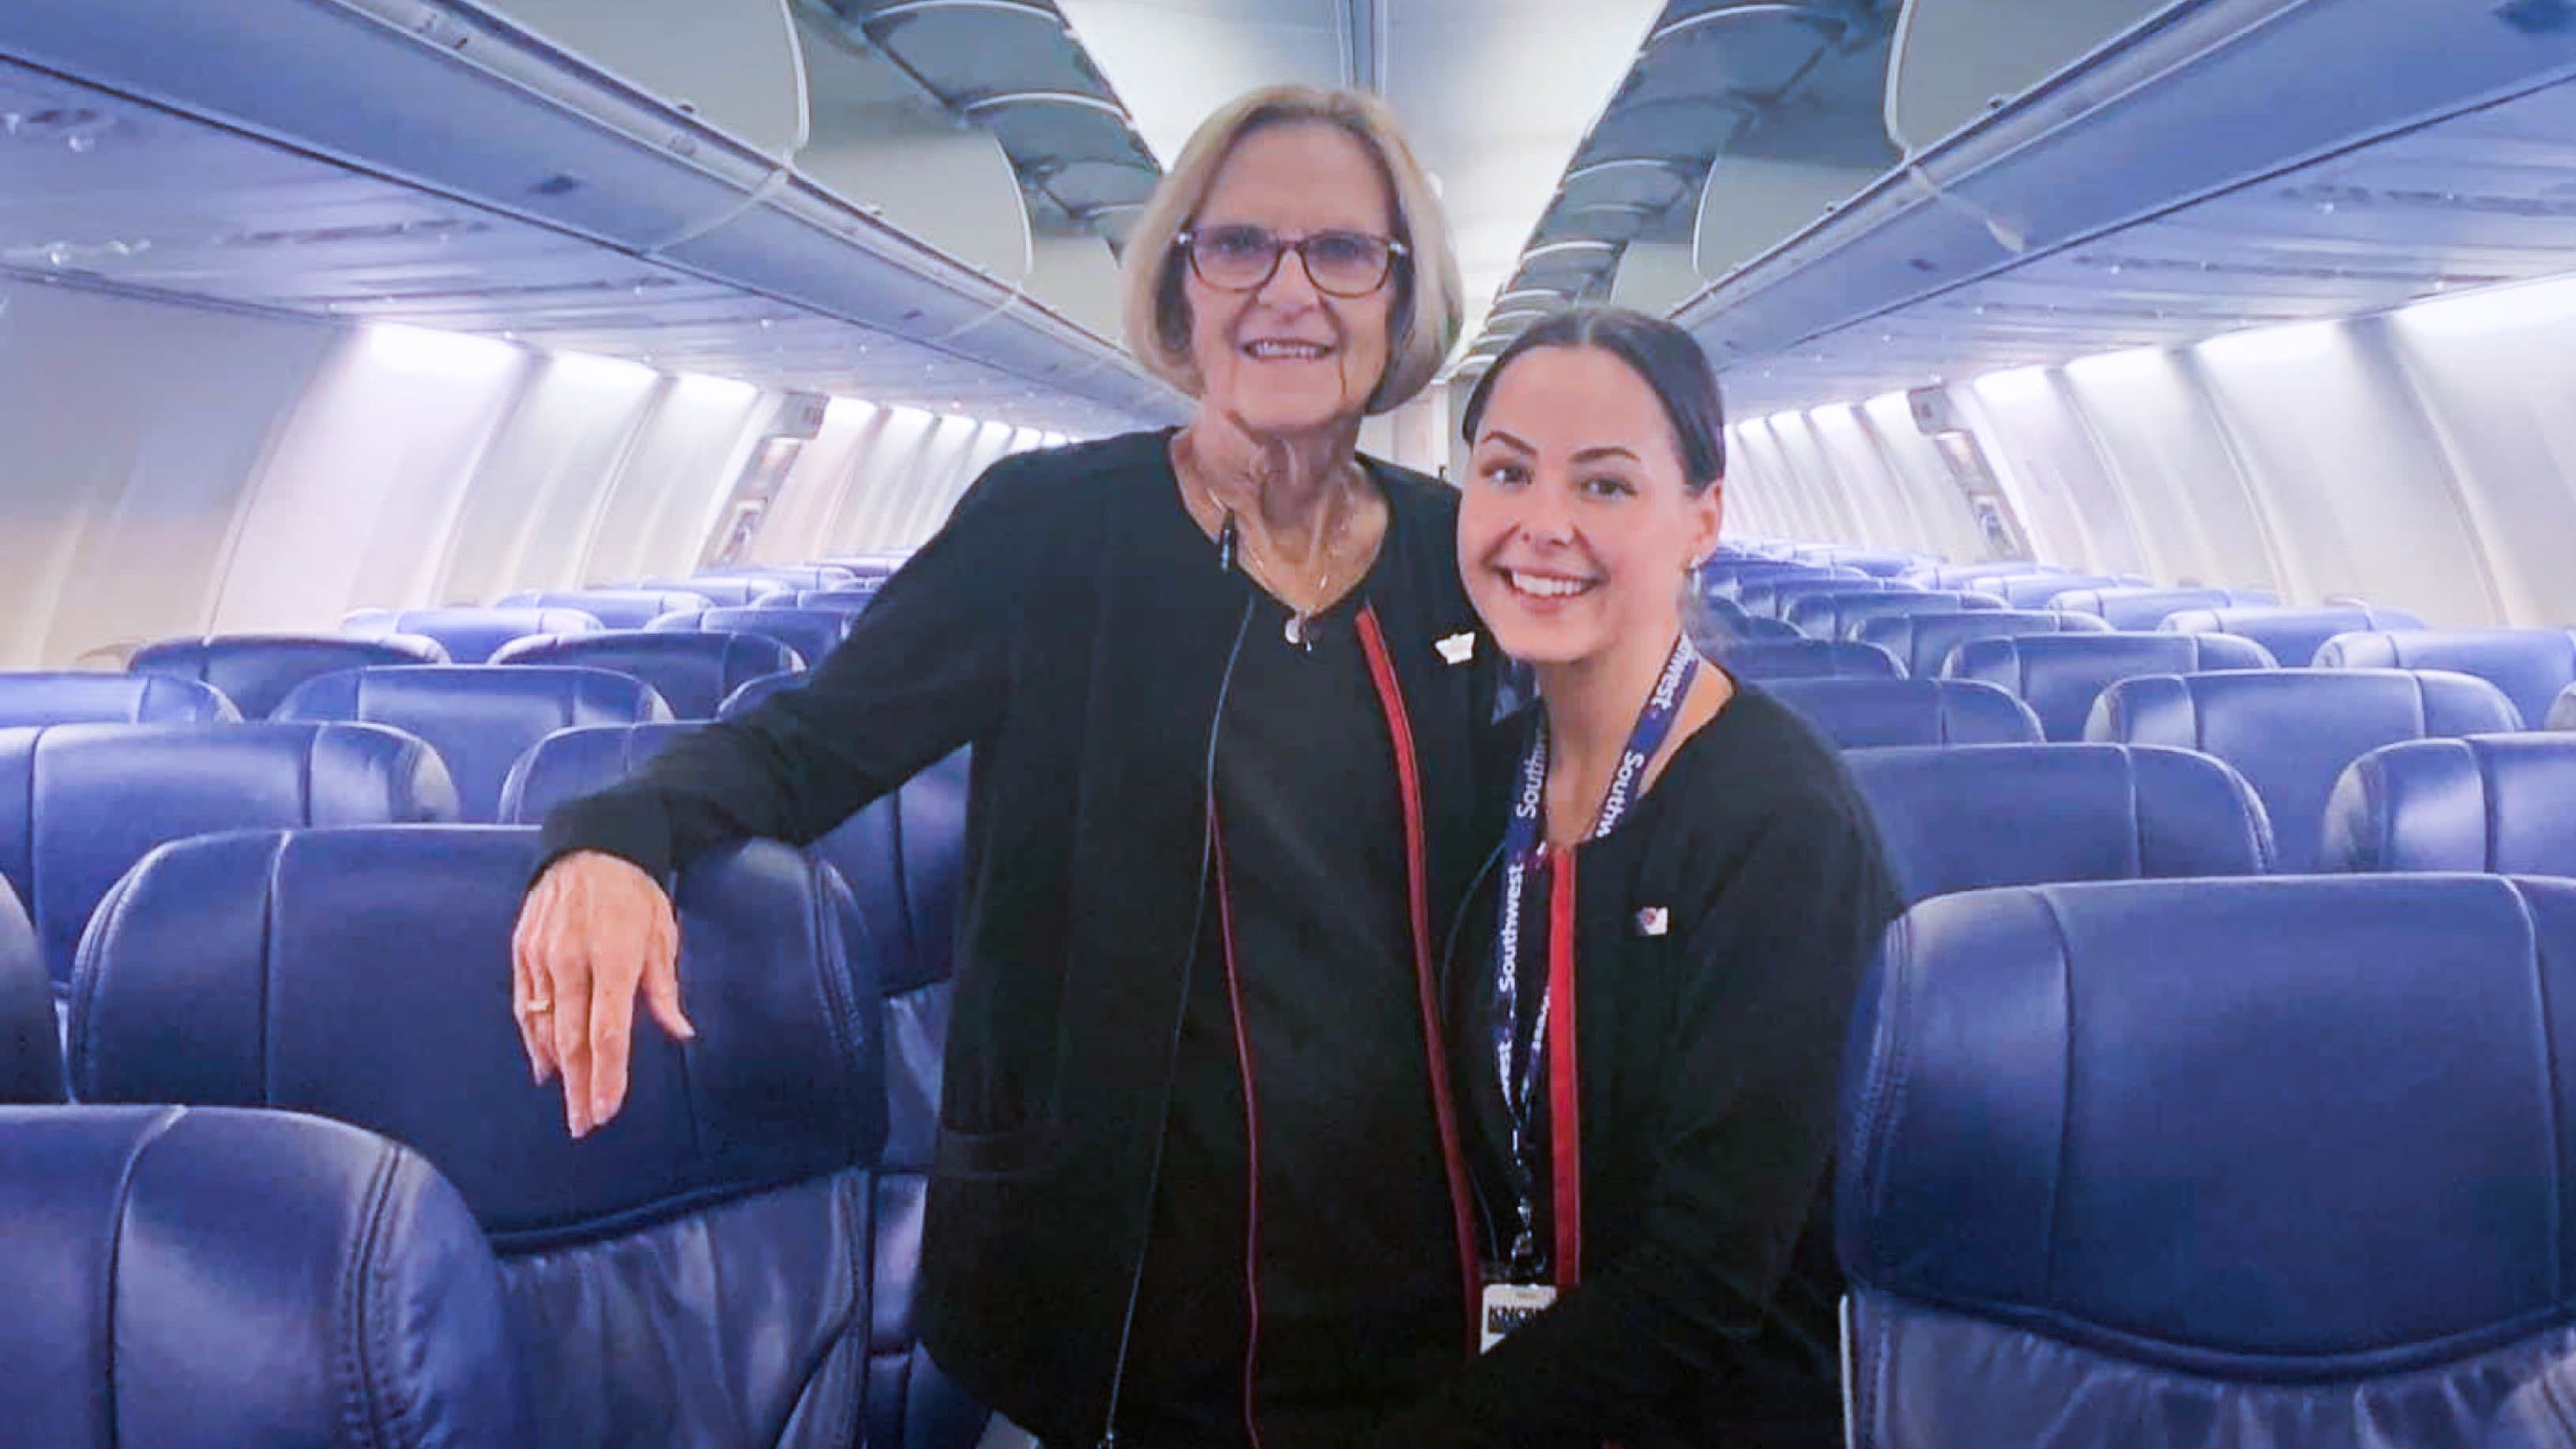 Cynthia Heck, left, and her granddaughter Hannah Heck are both Southwest Airlines flight attendants.